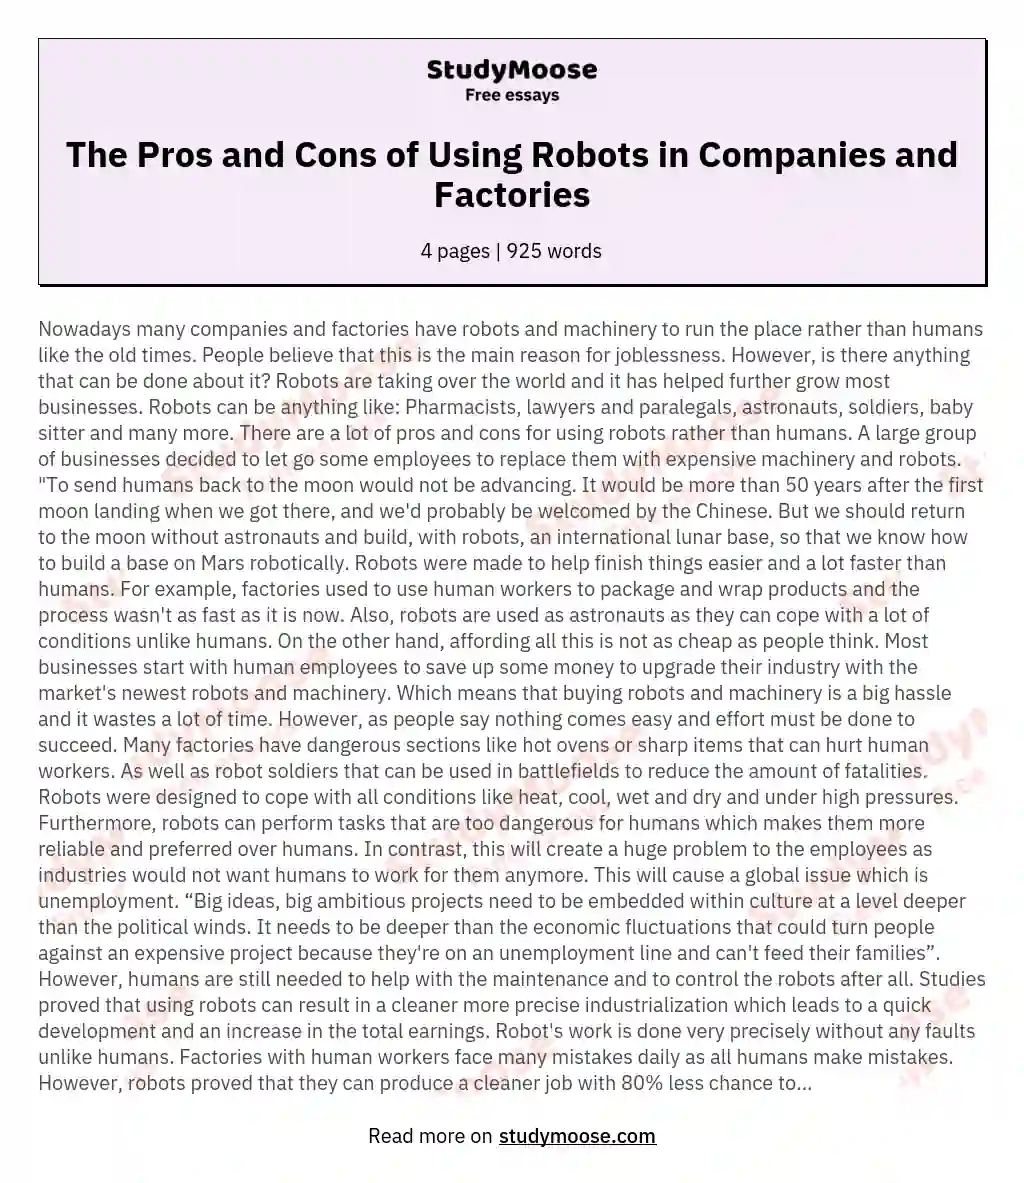 The Pros and Cons of Using Robots in Companies and Factories essay